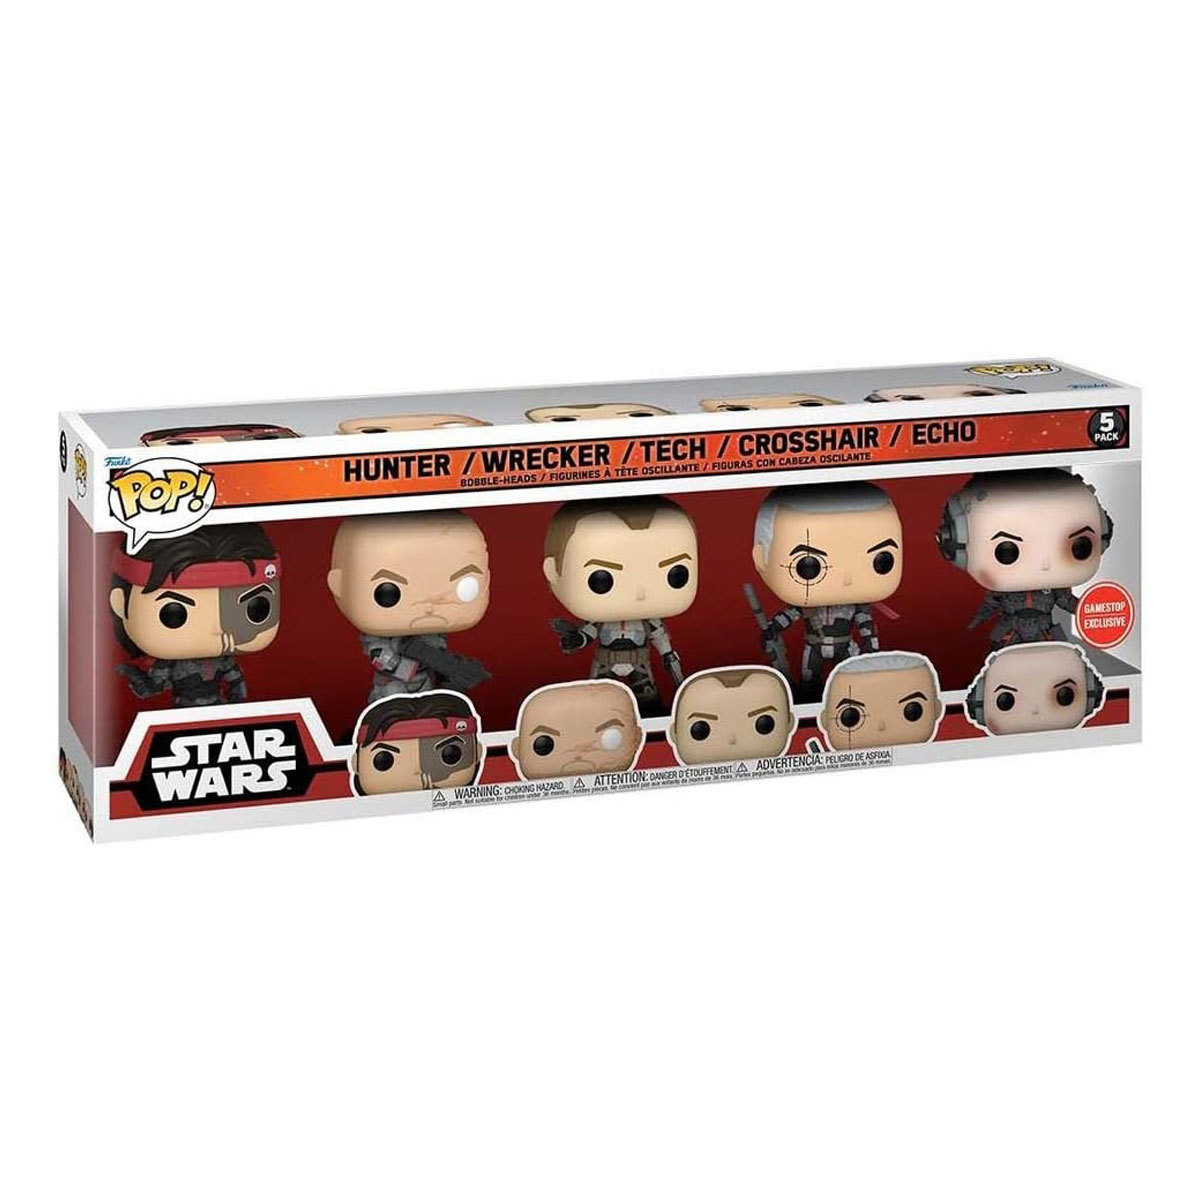 Funko Pop! Star Wars: The Bad Batch Collection 5 Pk | The Entertainer